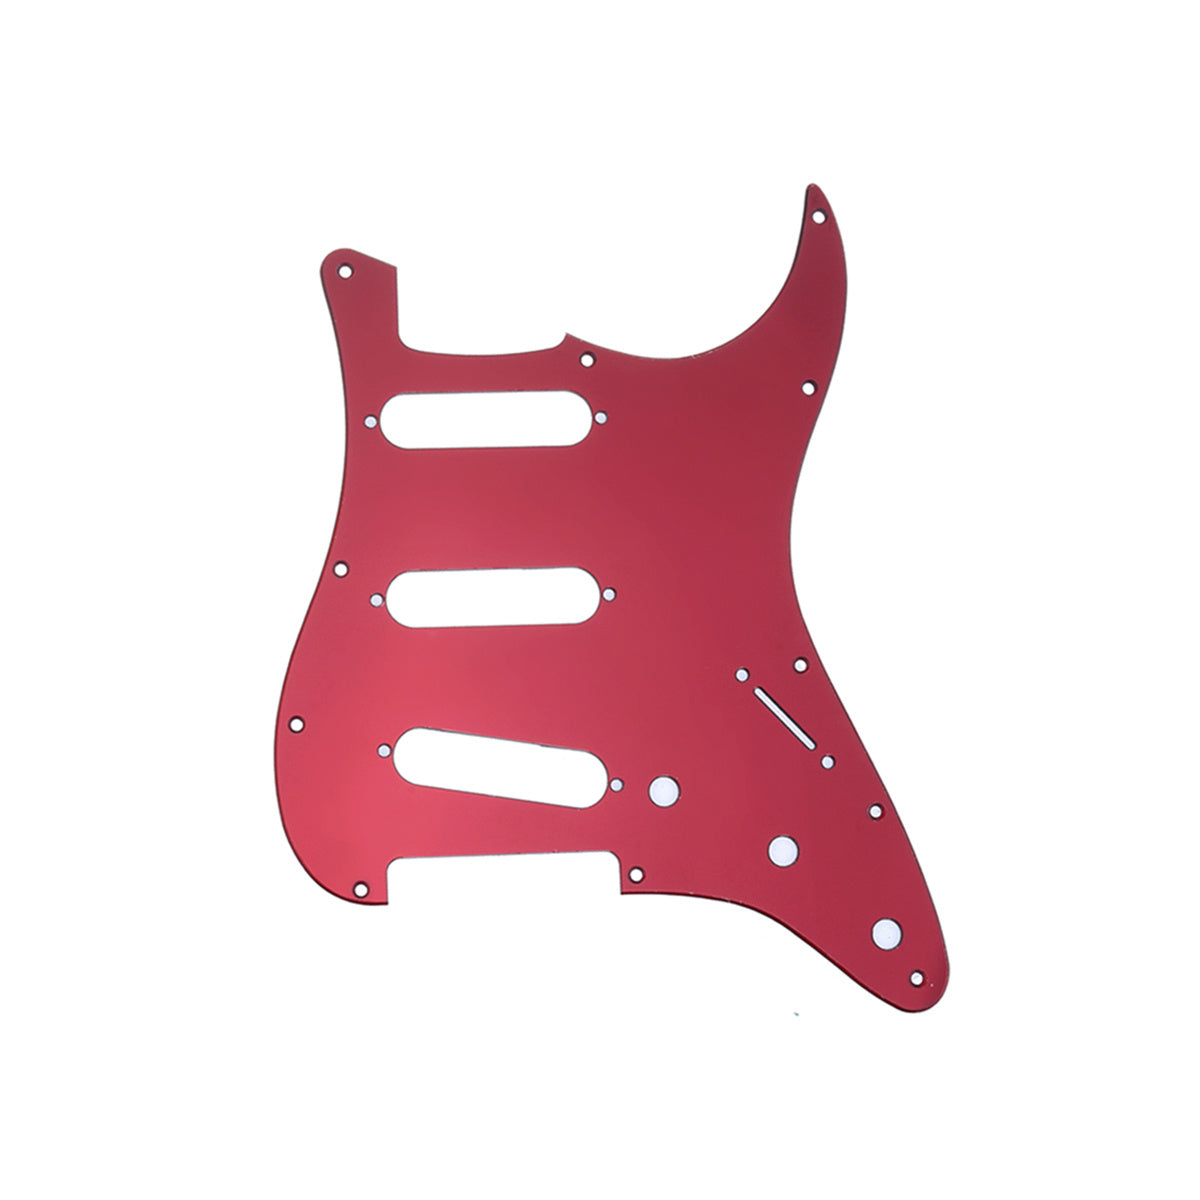 Musiclily SSS 11 Hole Strat Guitar Pickguard for Fender USA/Mexican Made Standard Stratocaster Modern Style, 1Ply Red Mirror Acrylic